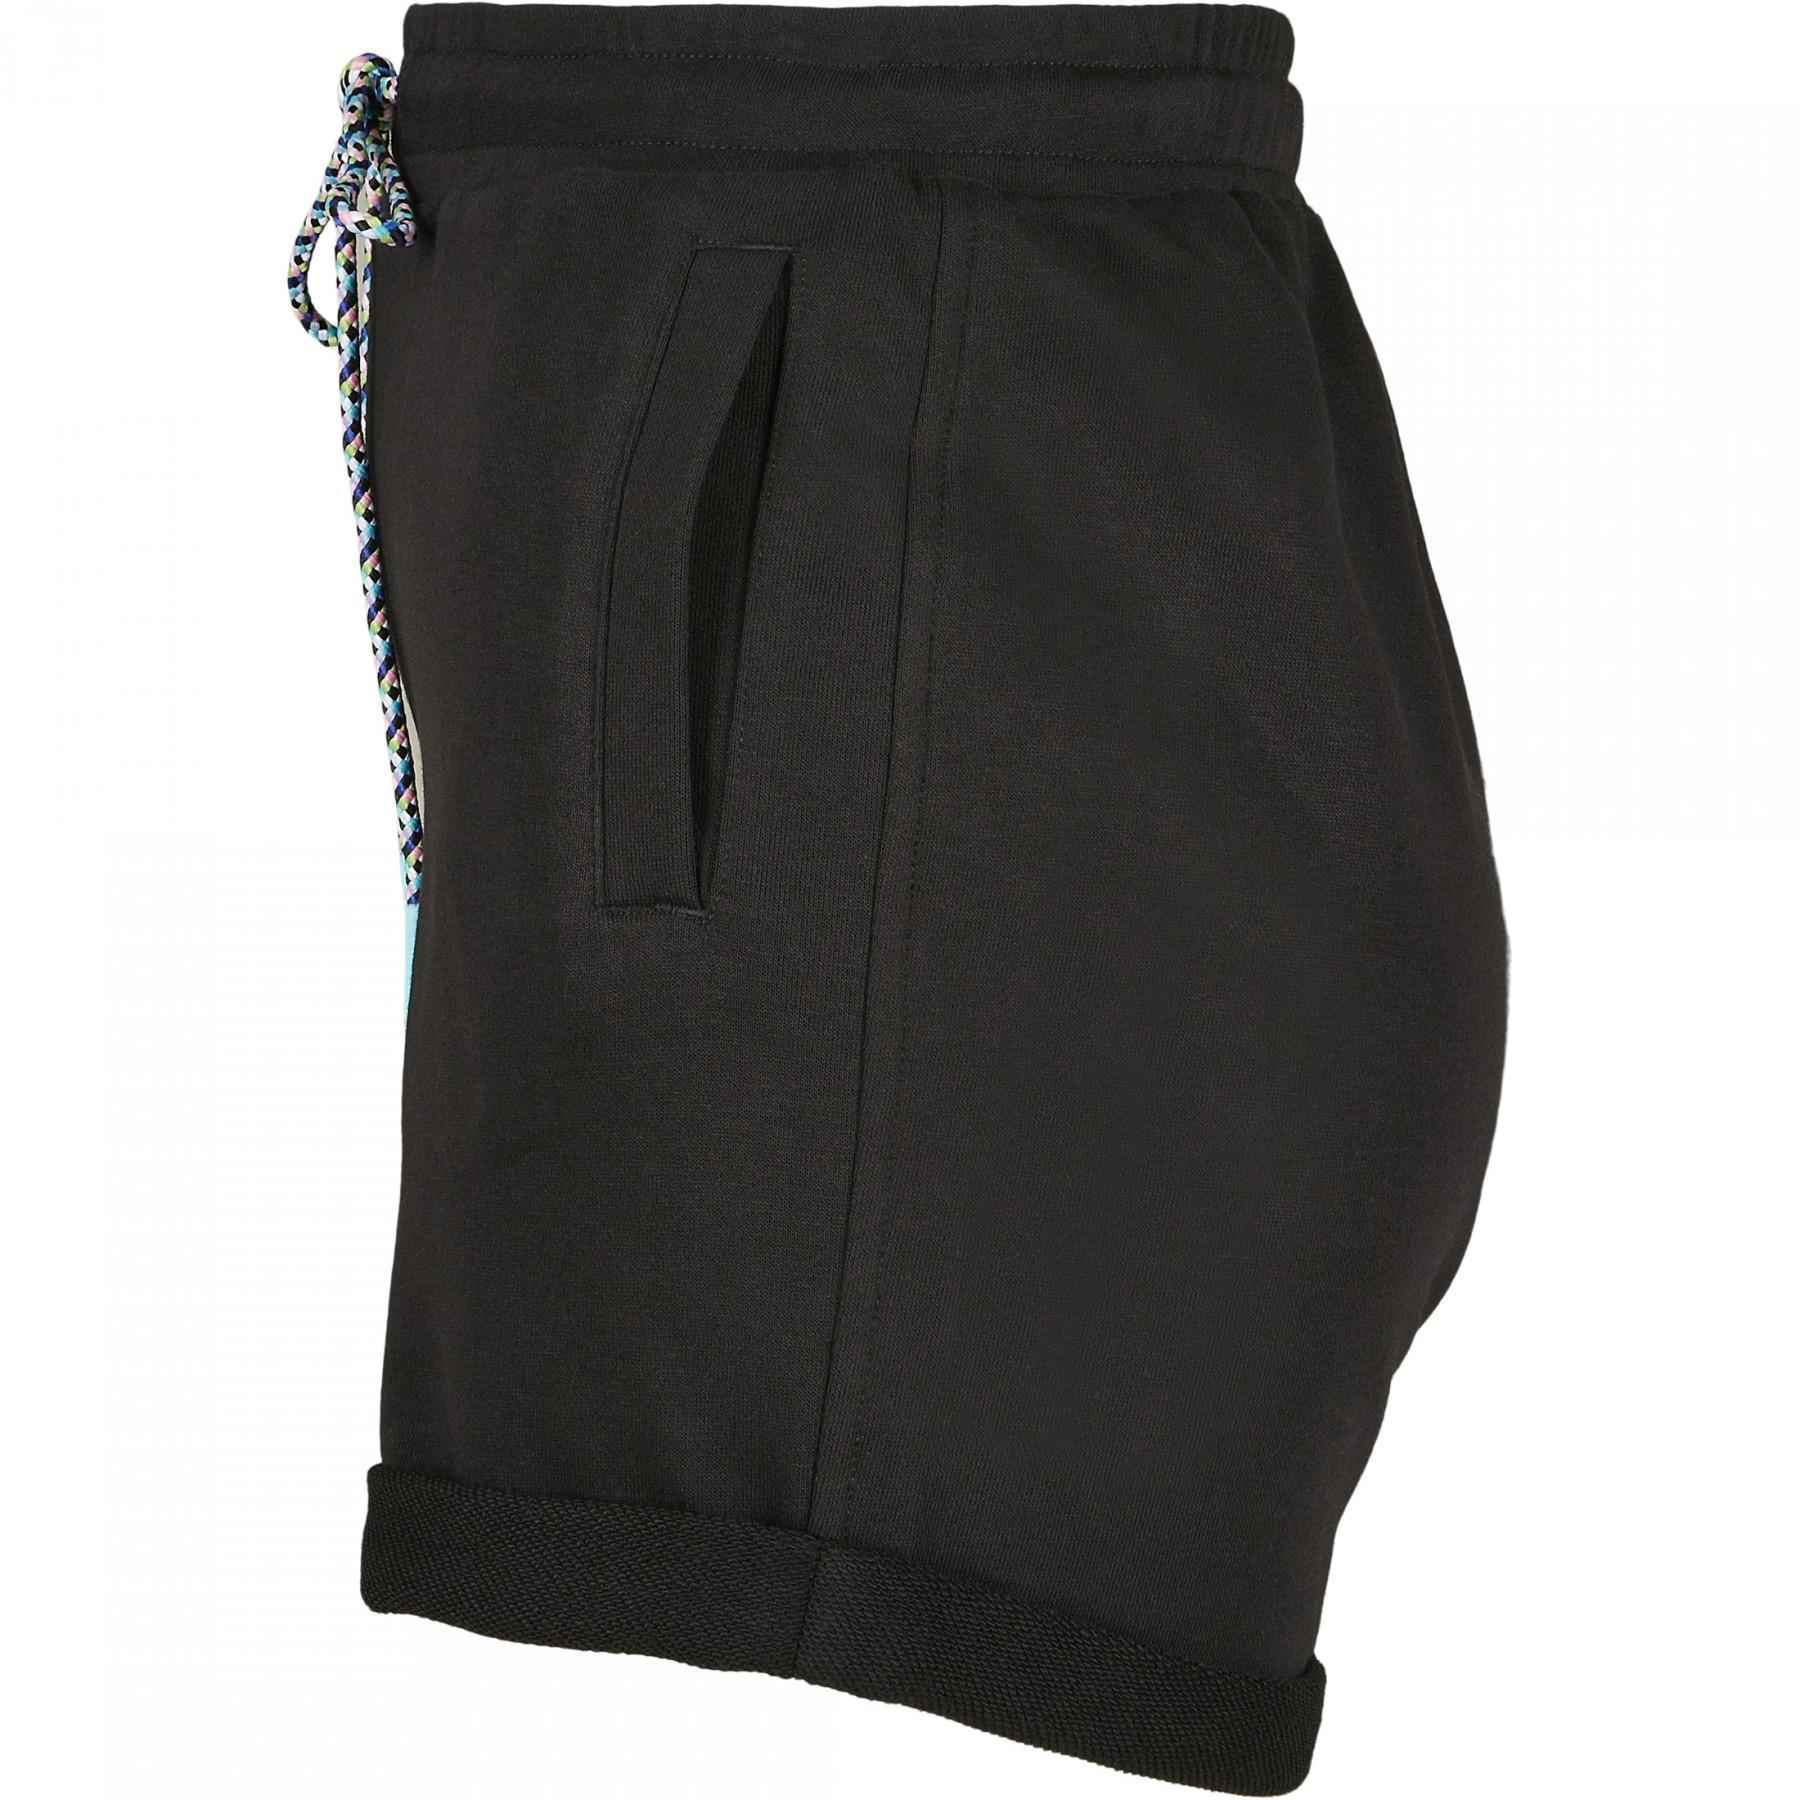 Women's Urban Classic beach terry shorts - Skirts and Shorts - Woman -  Lifestyle